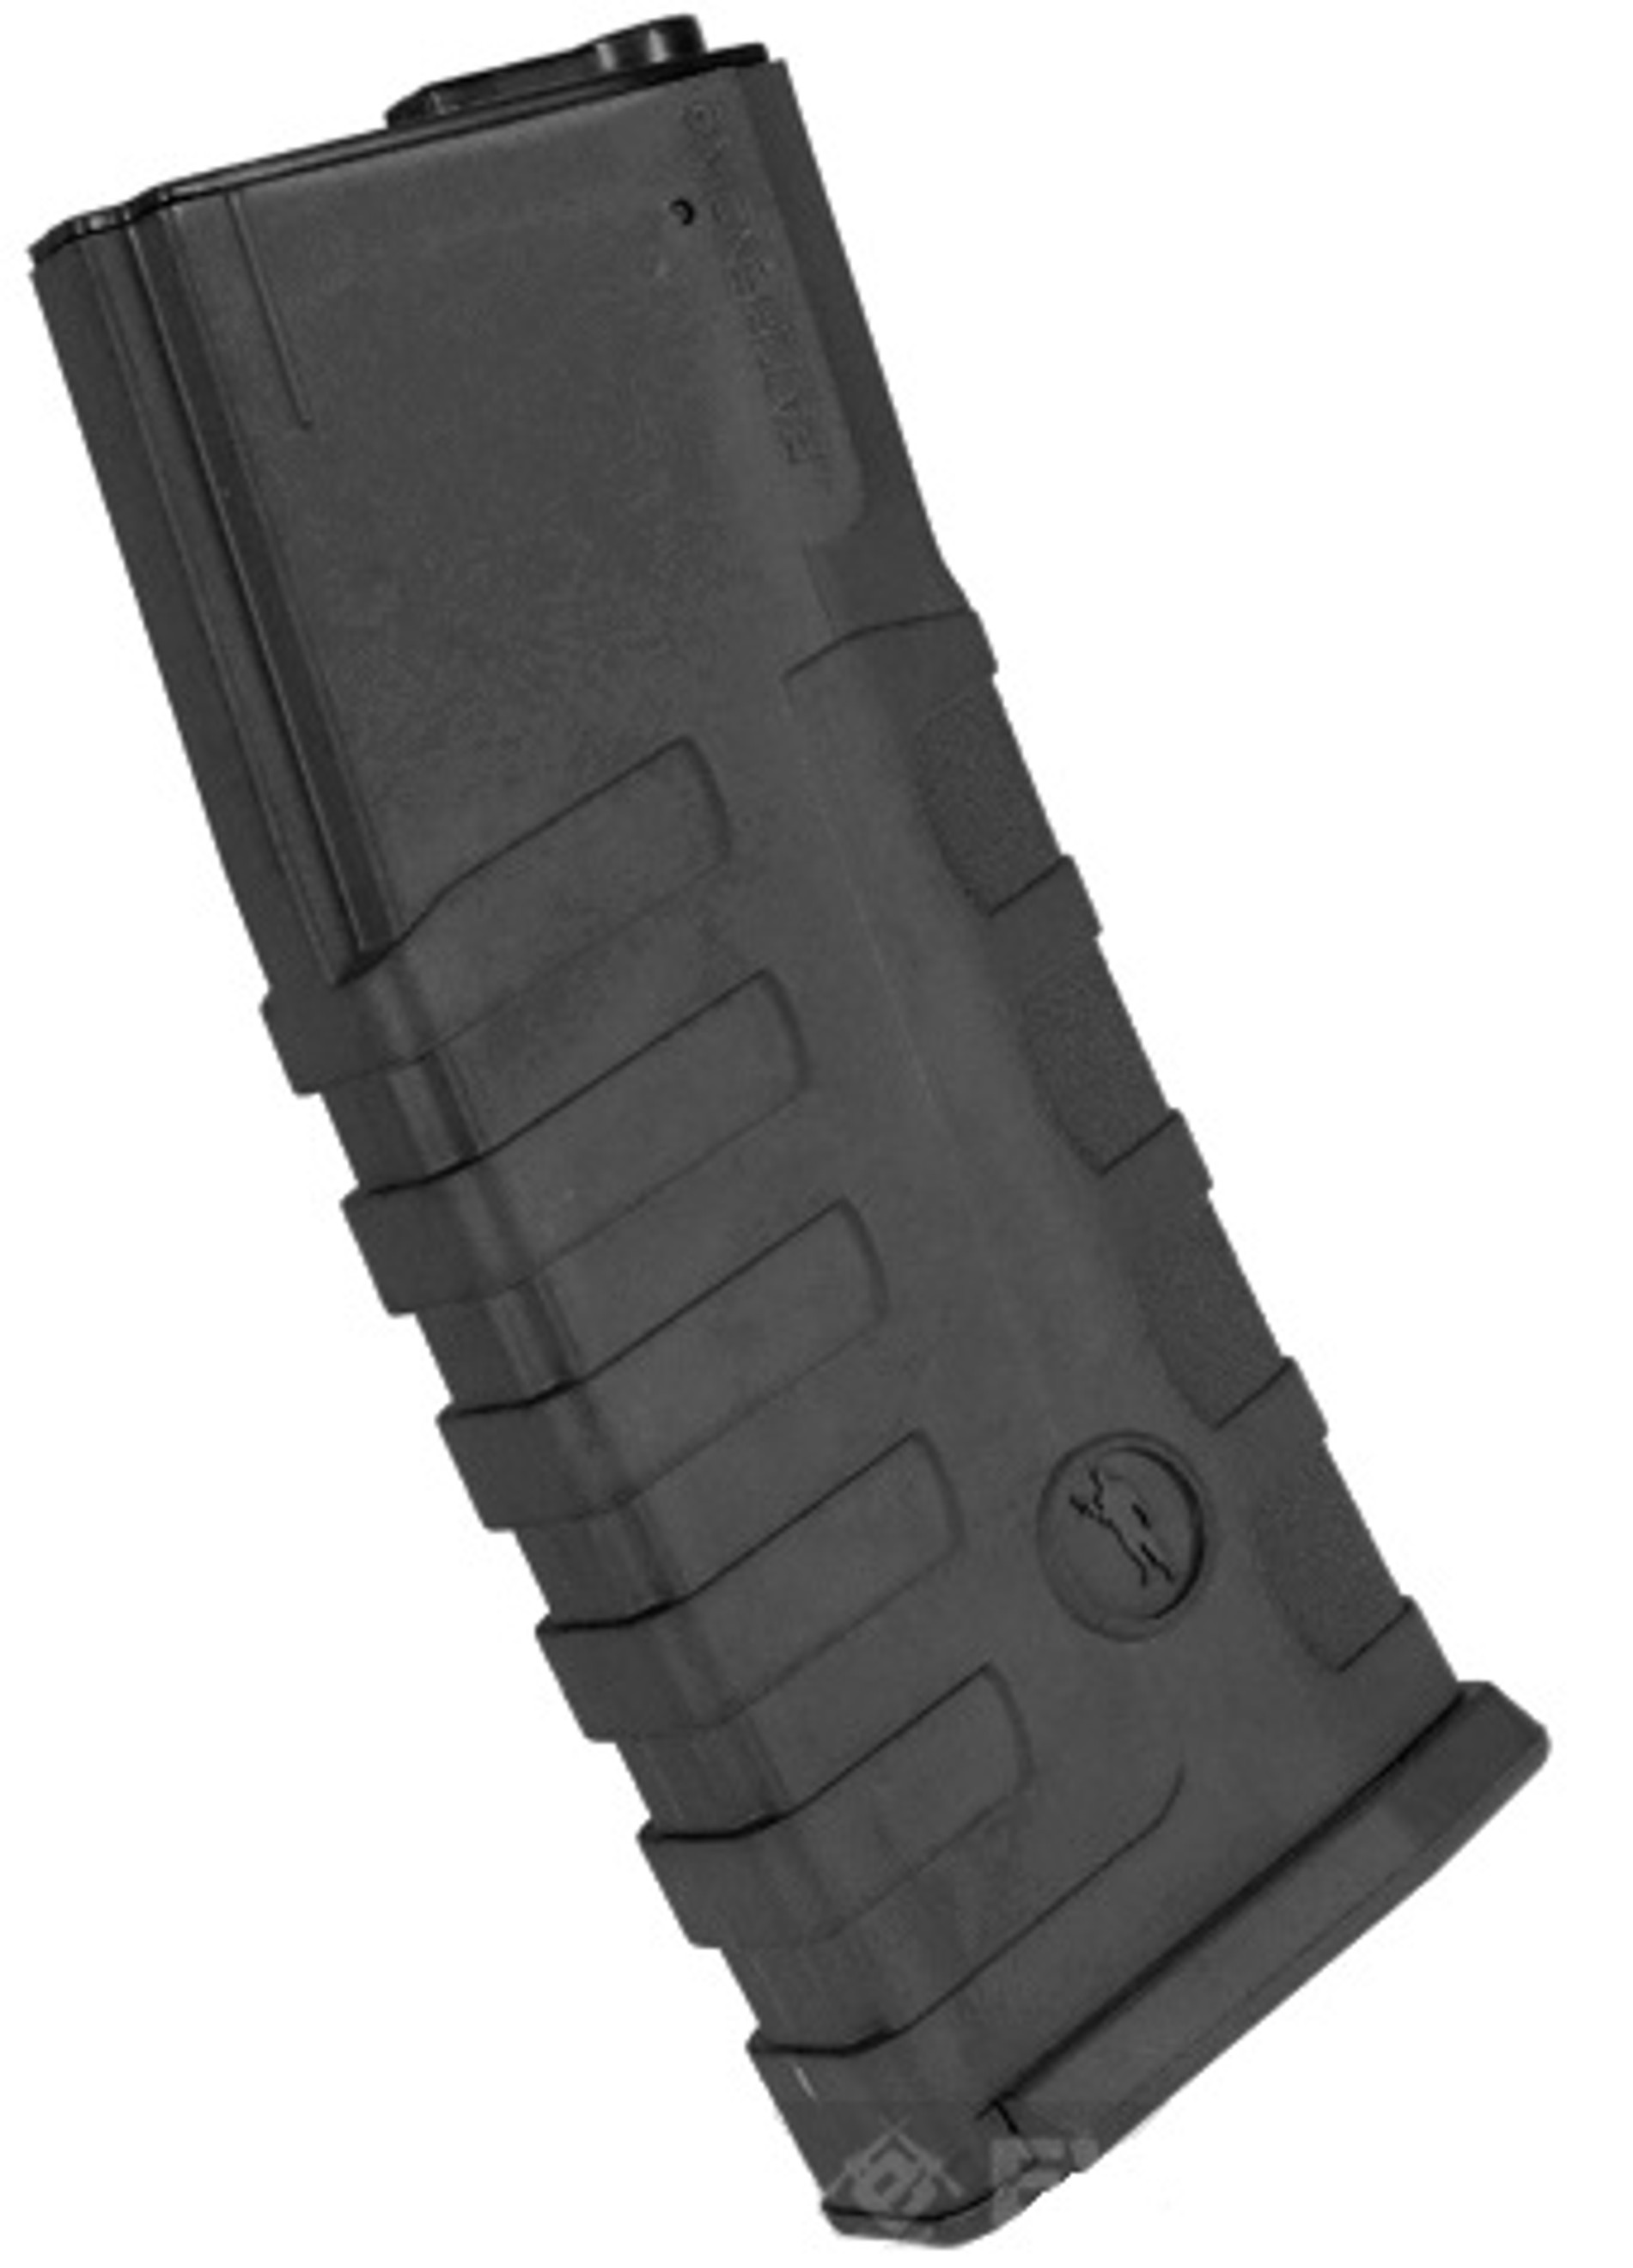 Command Arms CAA Licensed 360rd Mag For M4 M16 Airsoft AEG By King Arms - Black